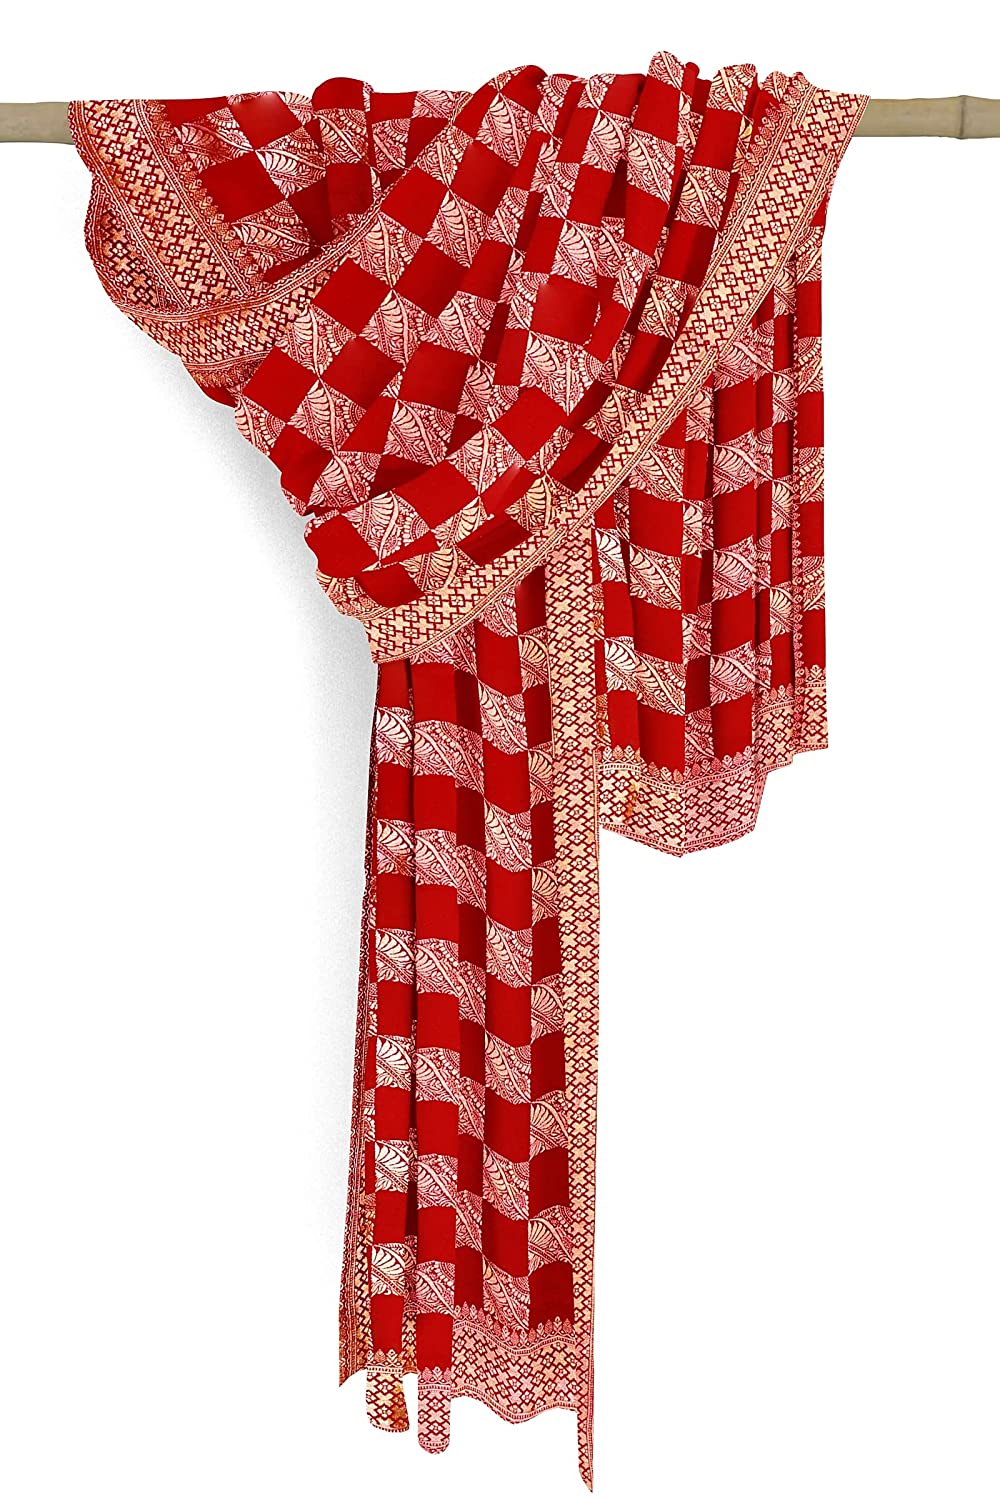 VOGZY.COM Beautiful Silk Dupatta With Plain Weave N Border For Women Free Size, Red Color